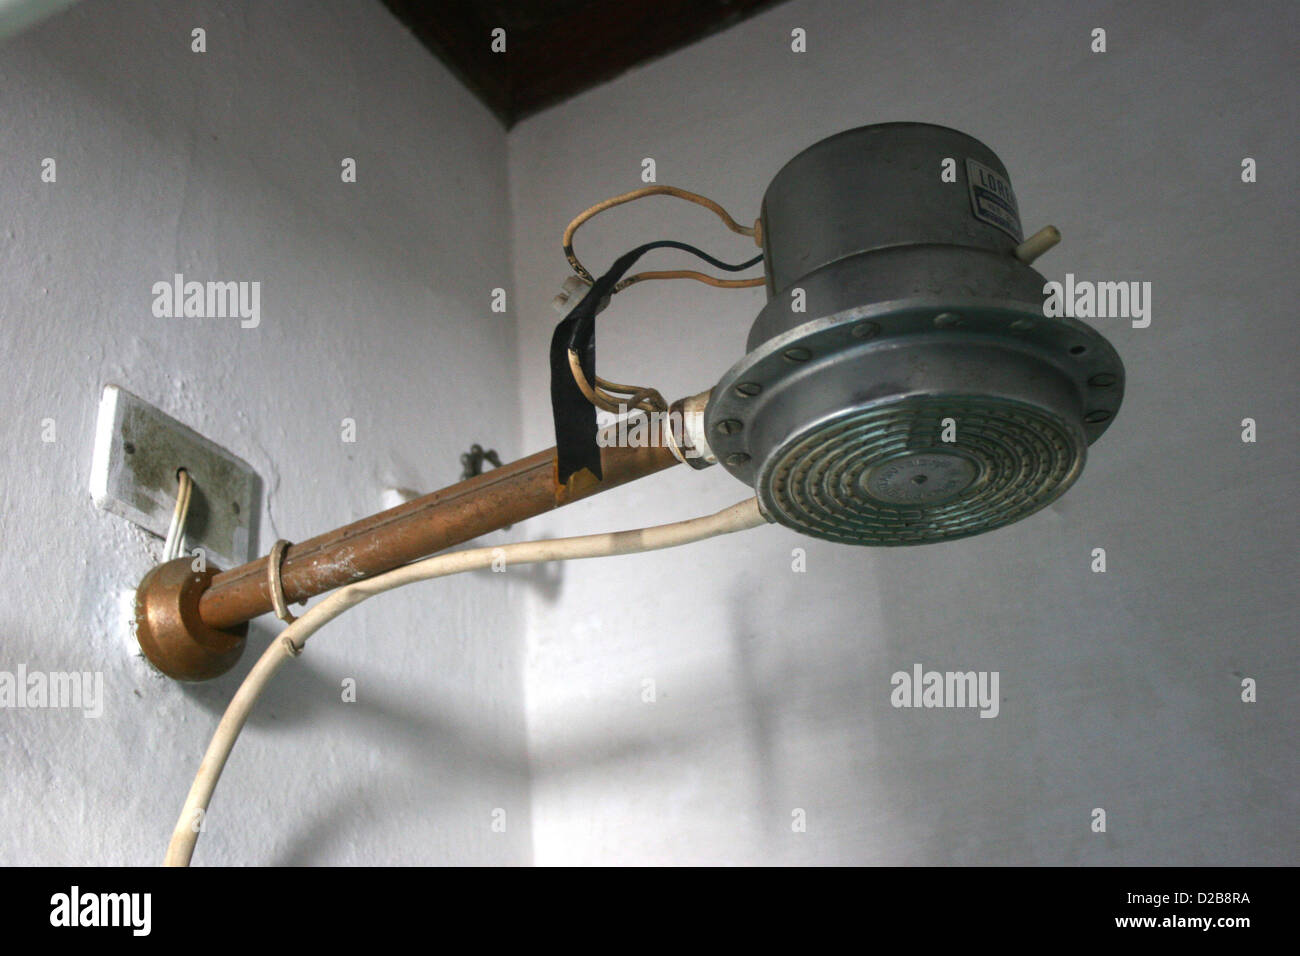 Paraty, Brazil, a shower head on the instantaneous water heater principle Stock Photo